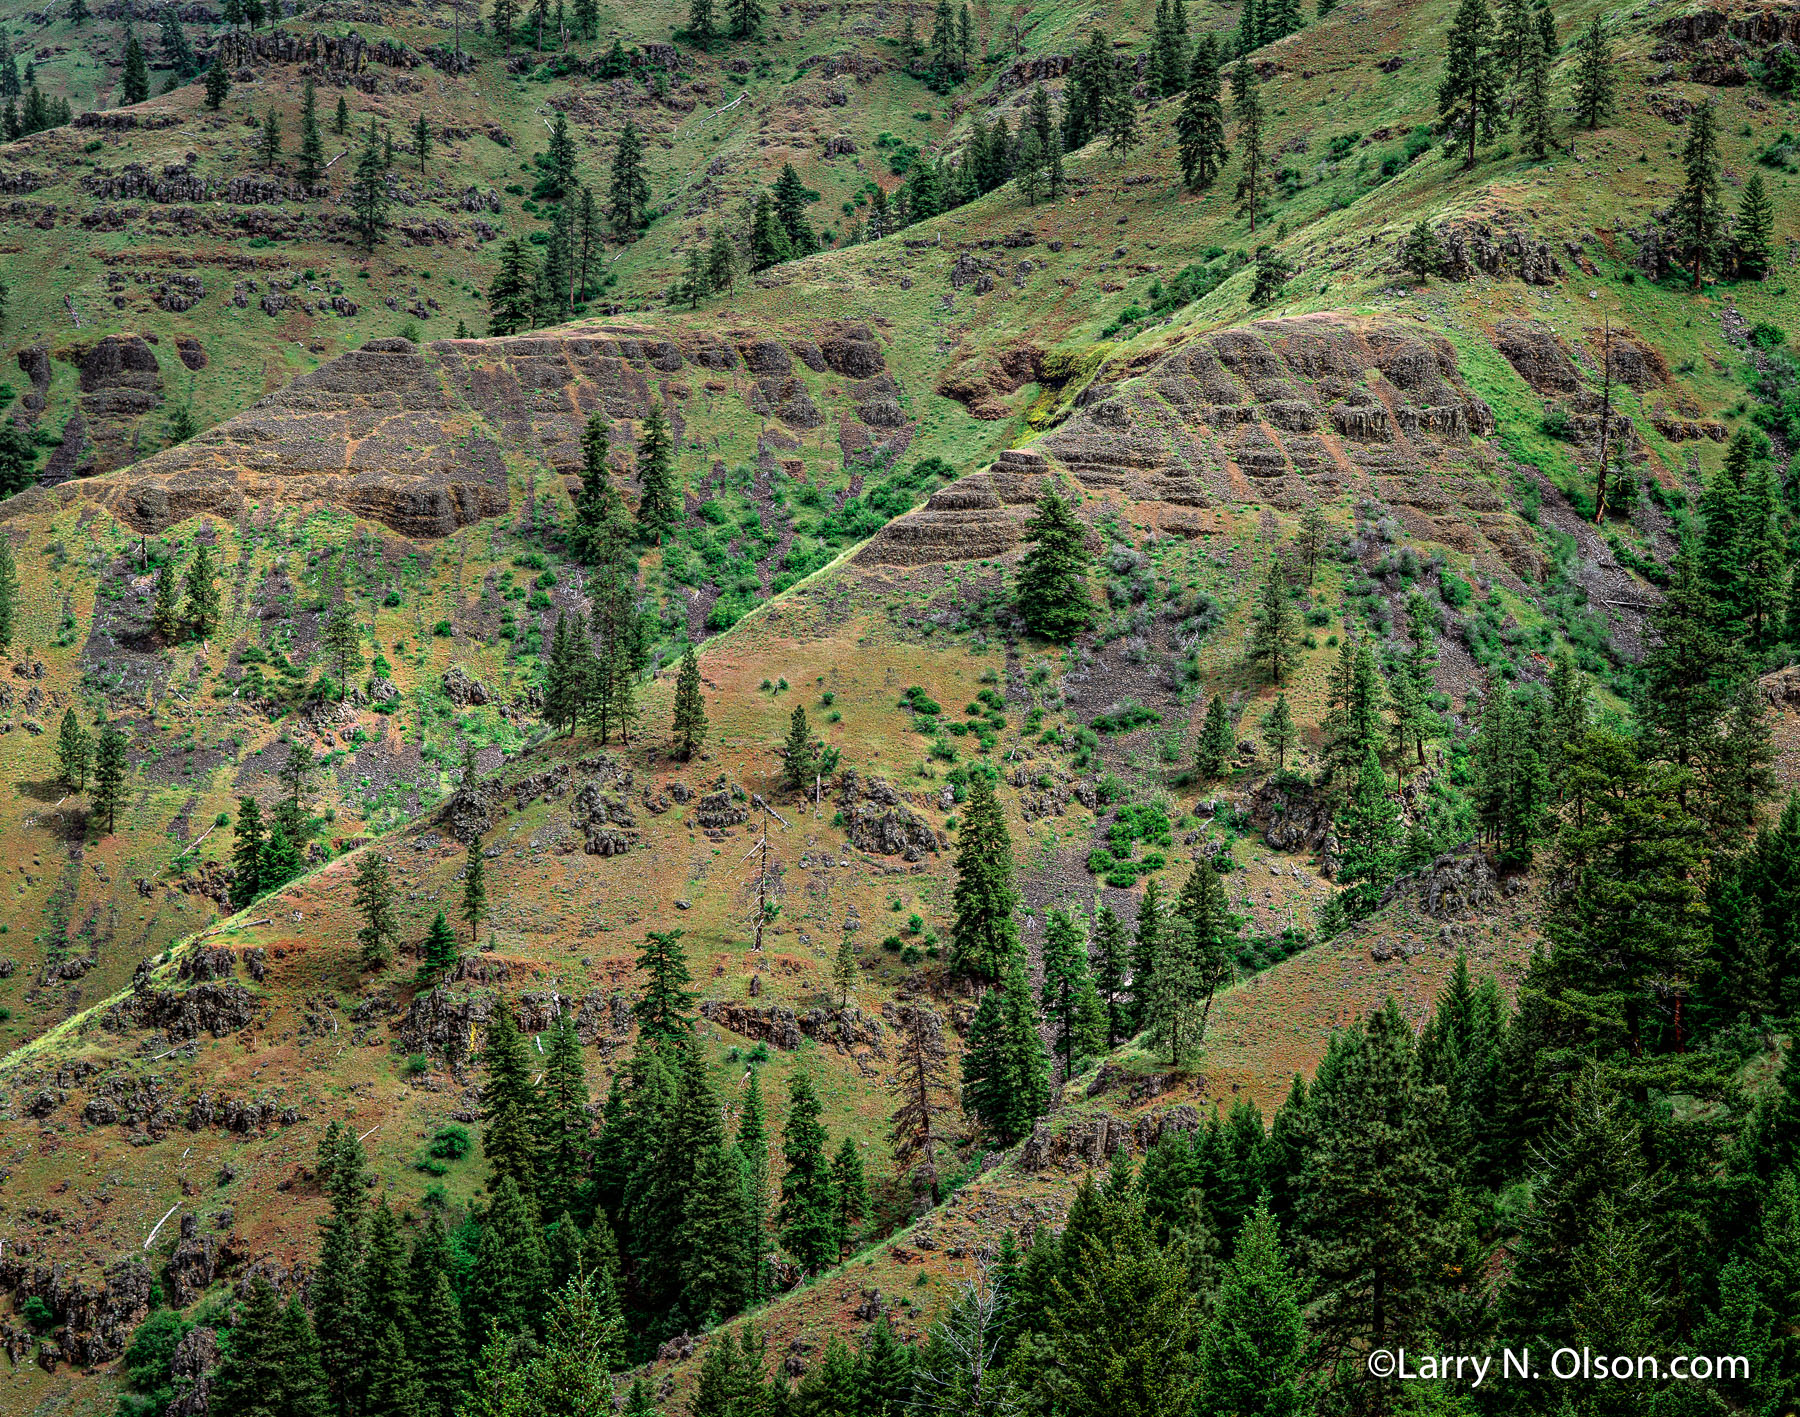 Grande Ronde River, OR, #674391 | The forest in the Blue Mountains gives way to grassy hillsides and basalt cliffs.